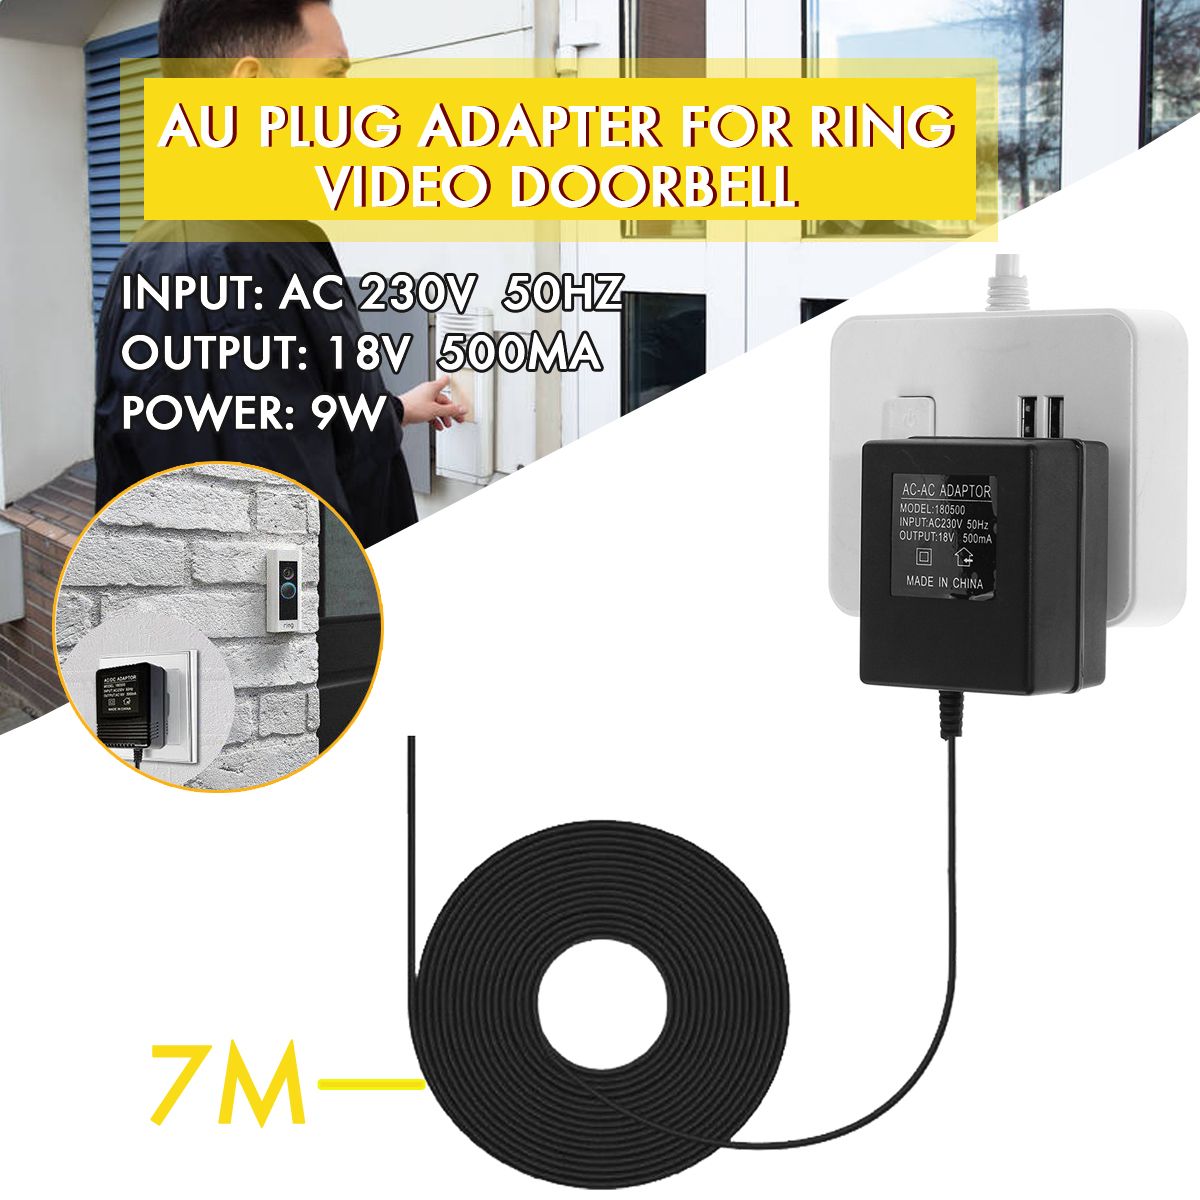 7m-Cable-AU-Plug-Adapter-for-Rring-Video-Doorbell-230V-to-18V-500ma-1587262